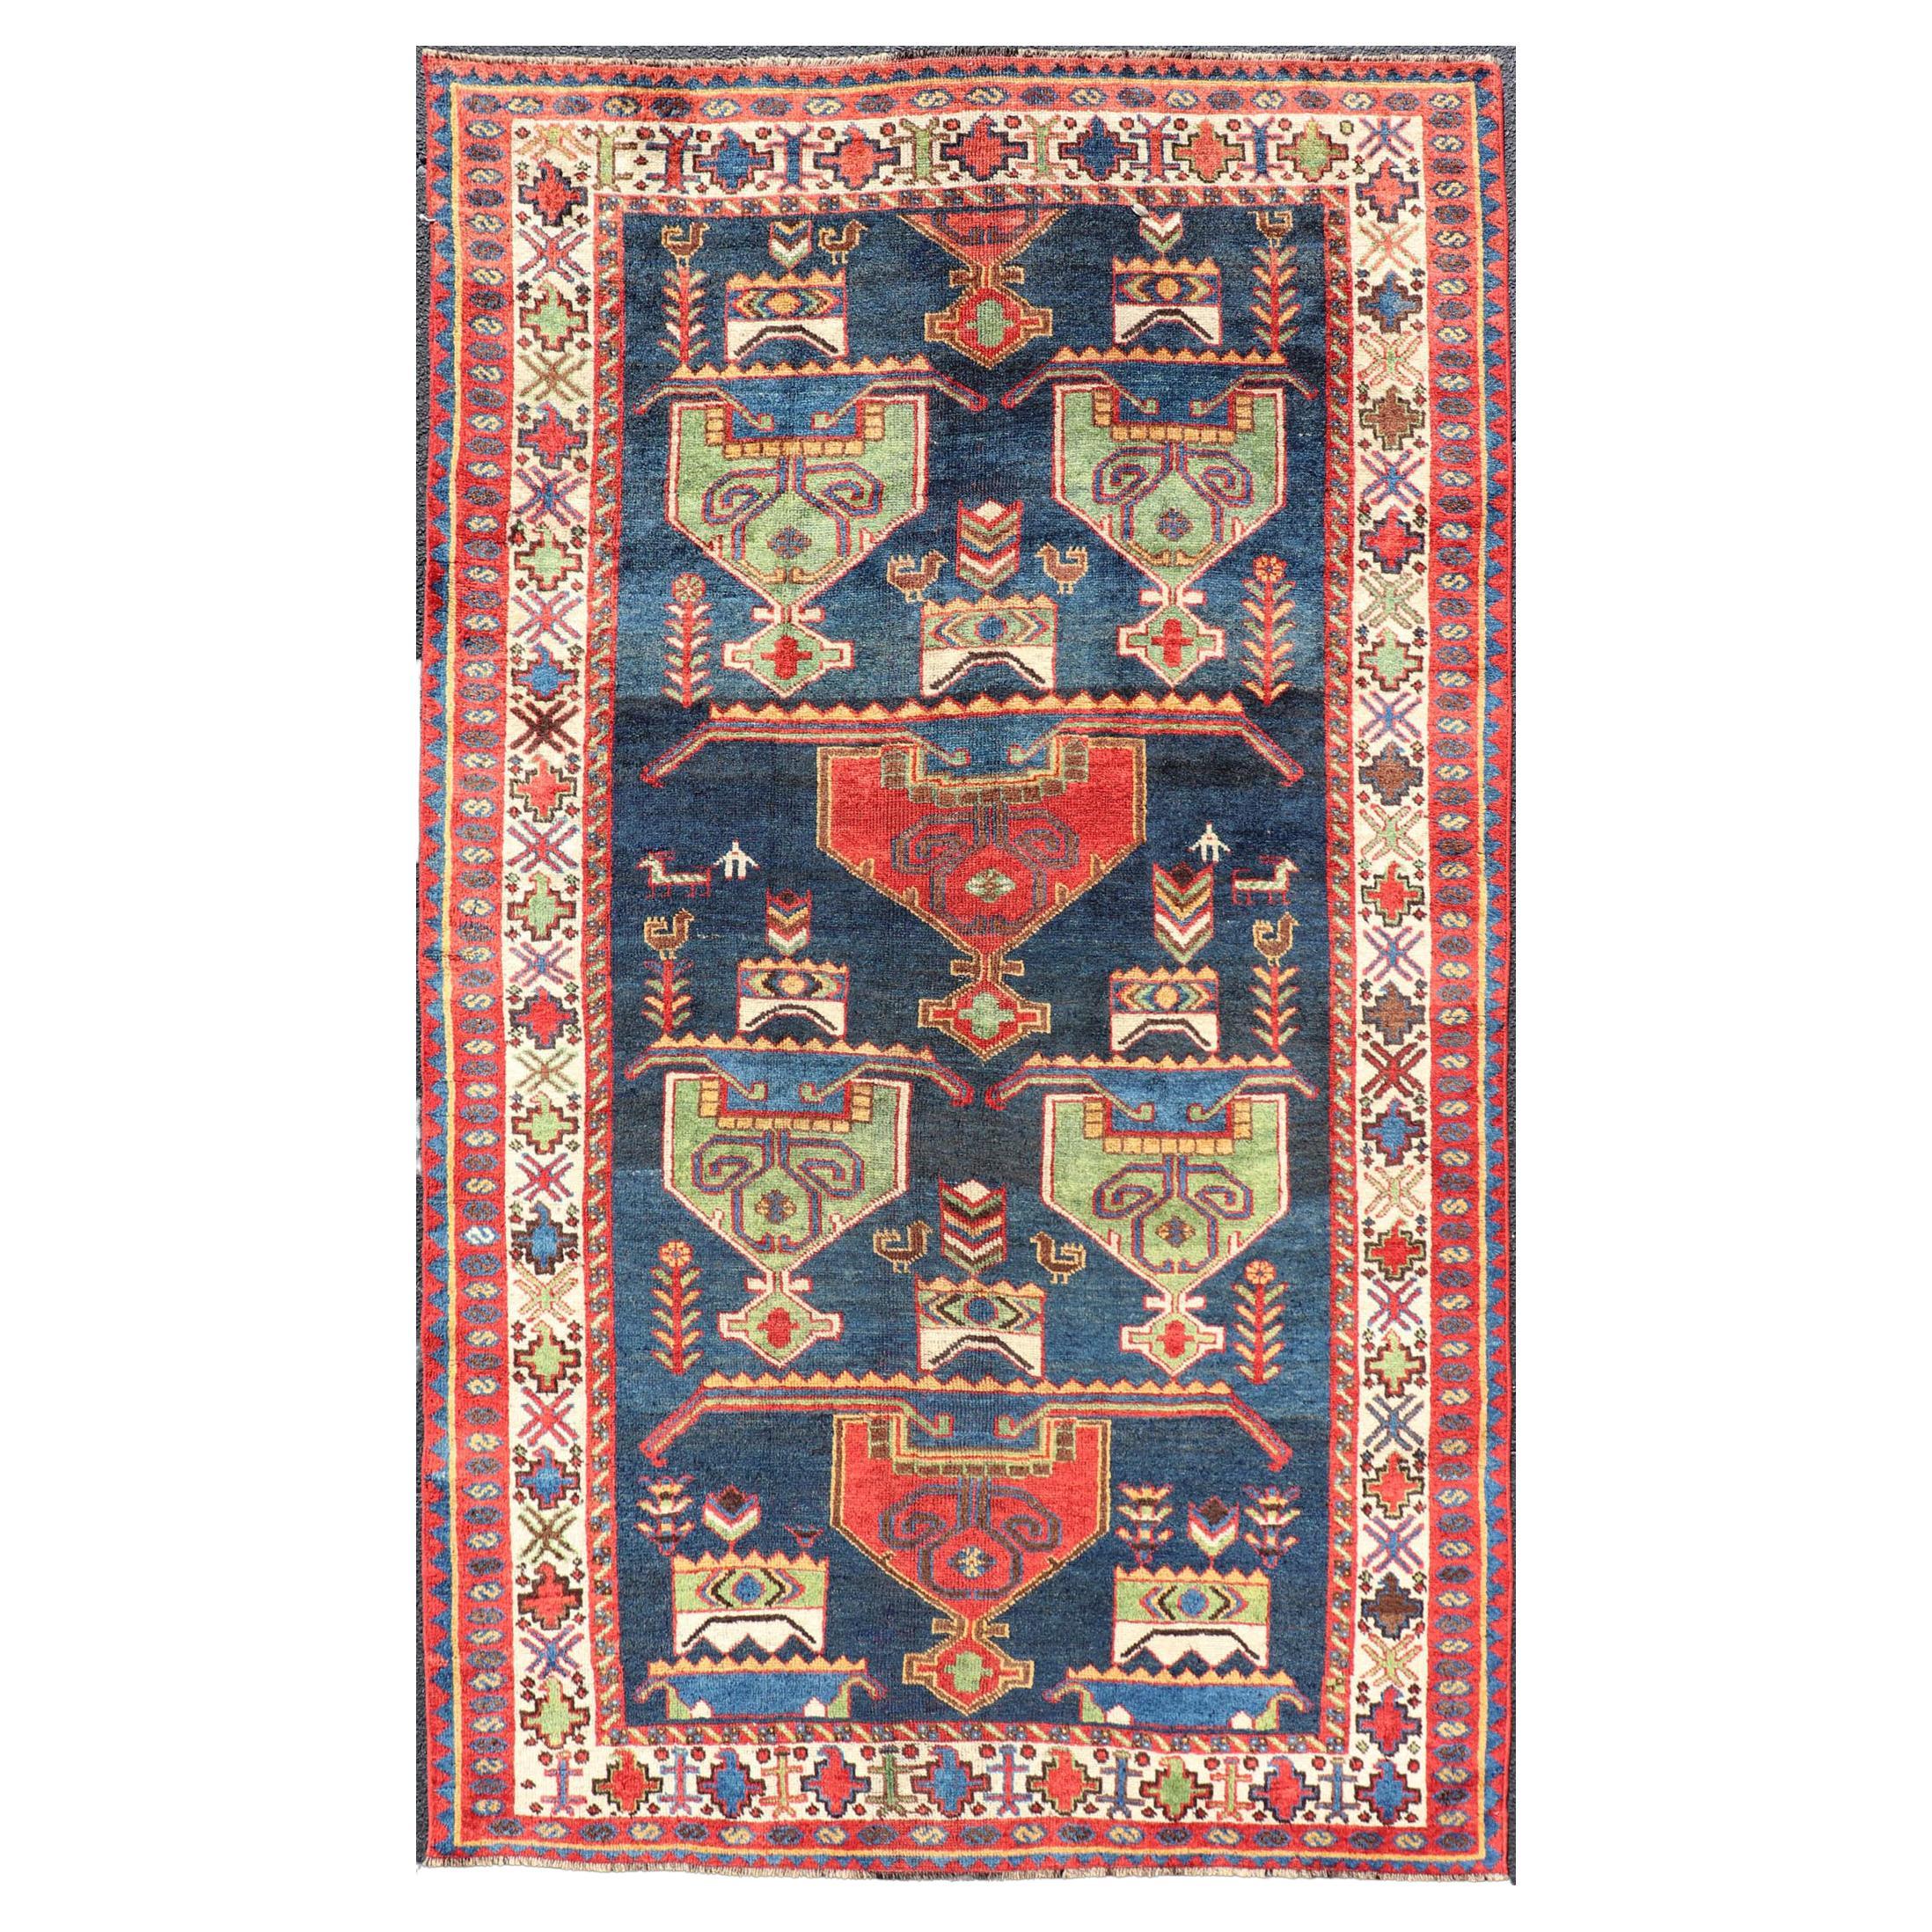 Colorful Antique Persian Lori Rug with All-Over Geometric Tribal Design